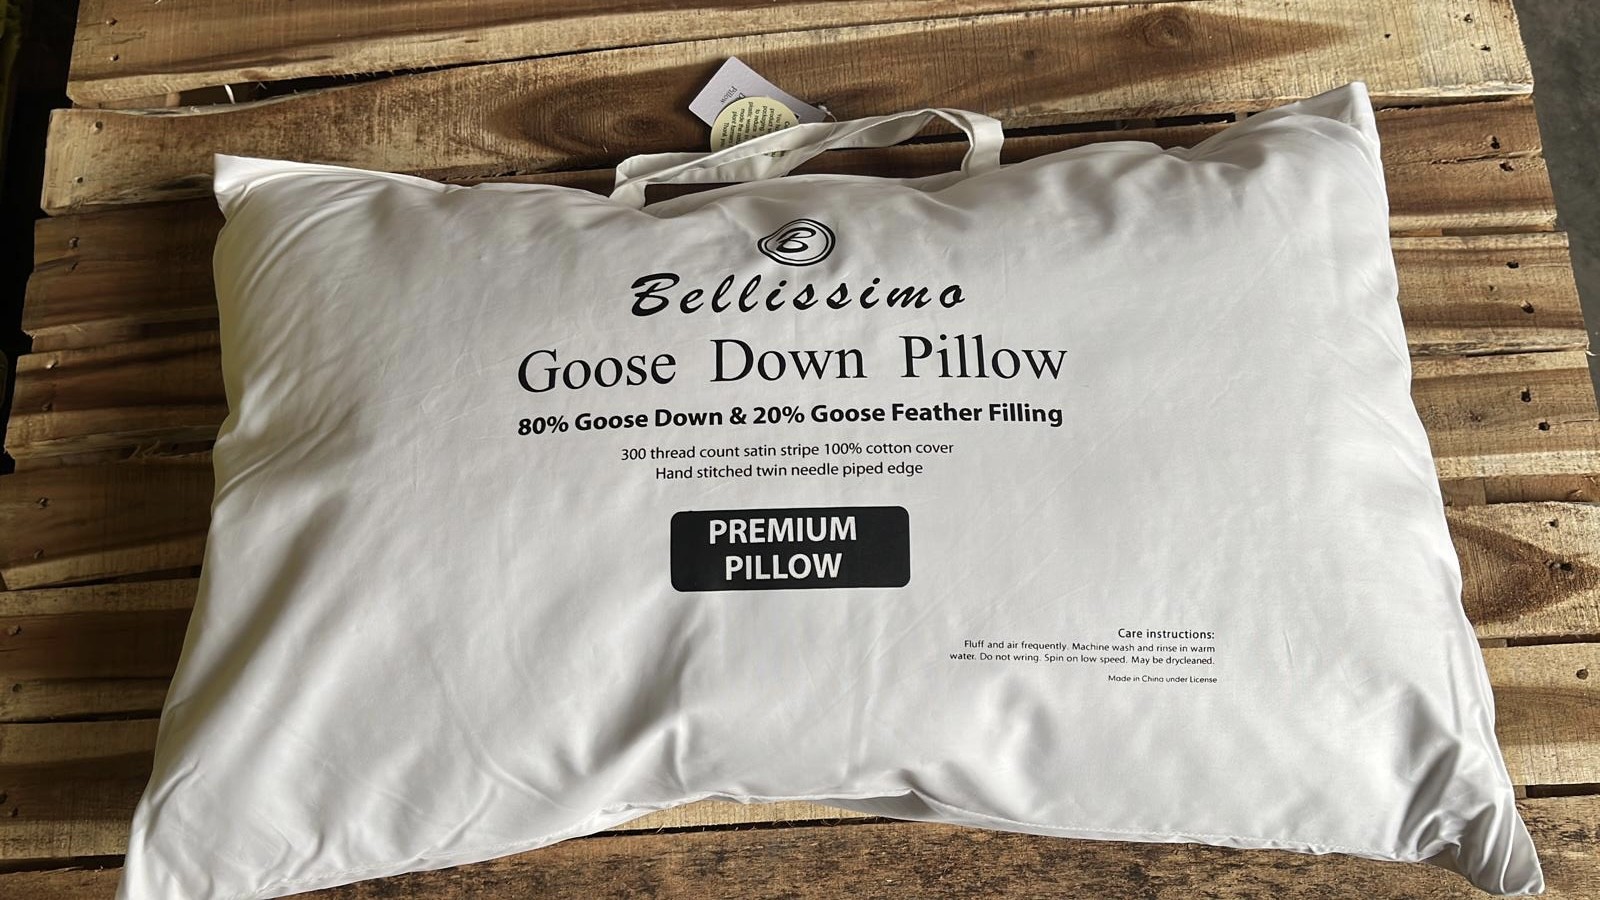 Bellissimo Goose Down Rich Pillow